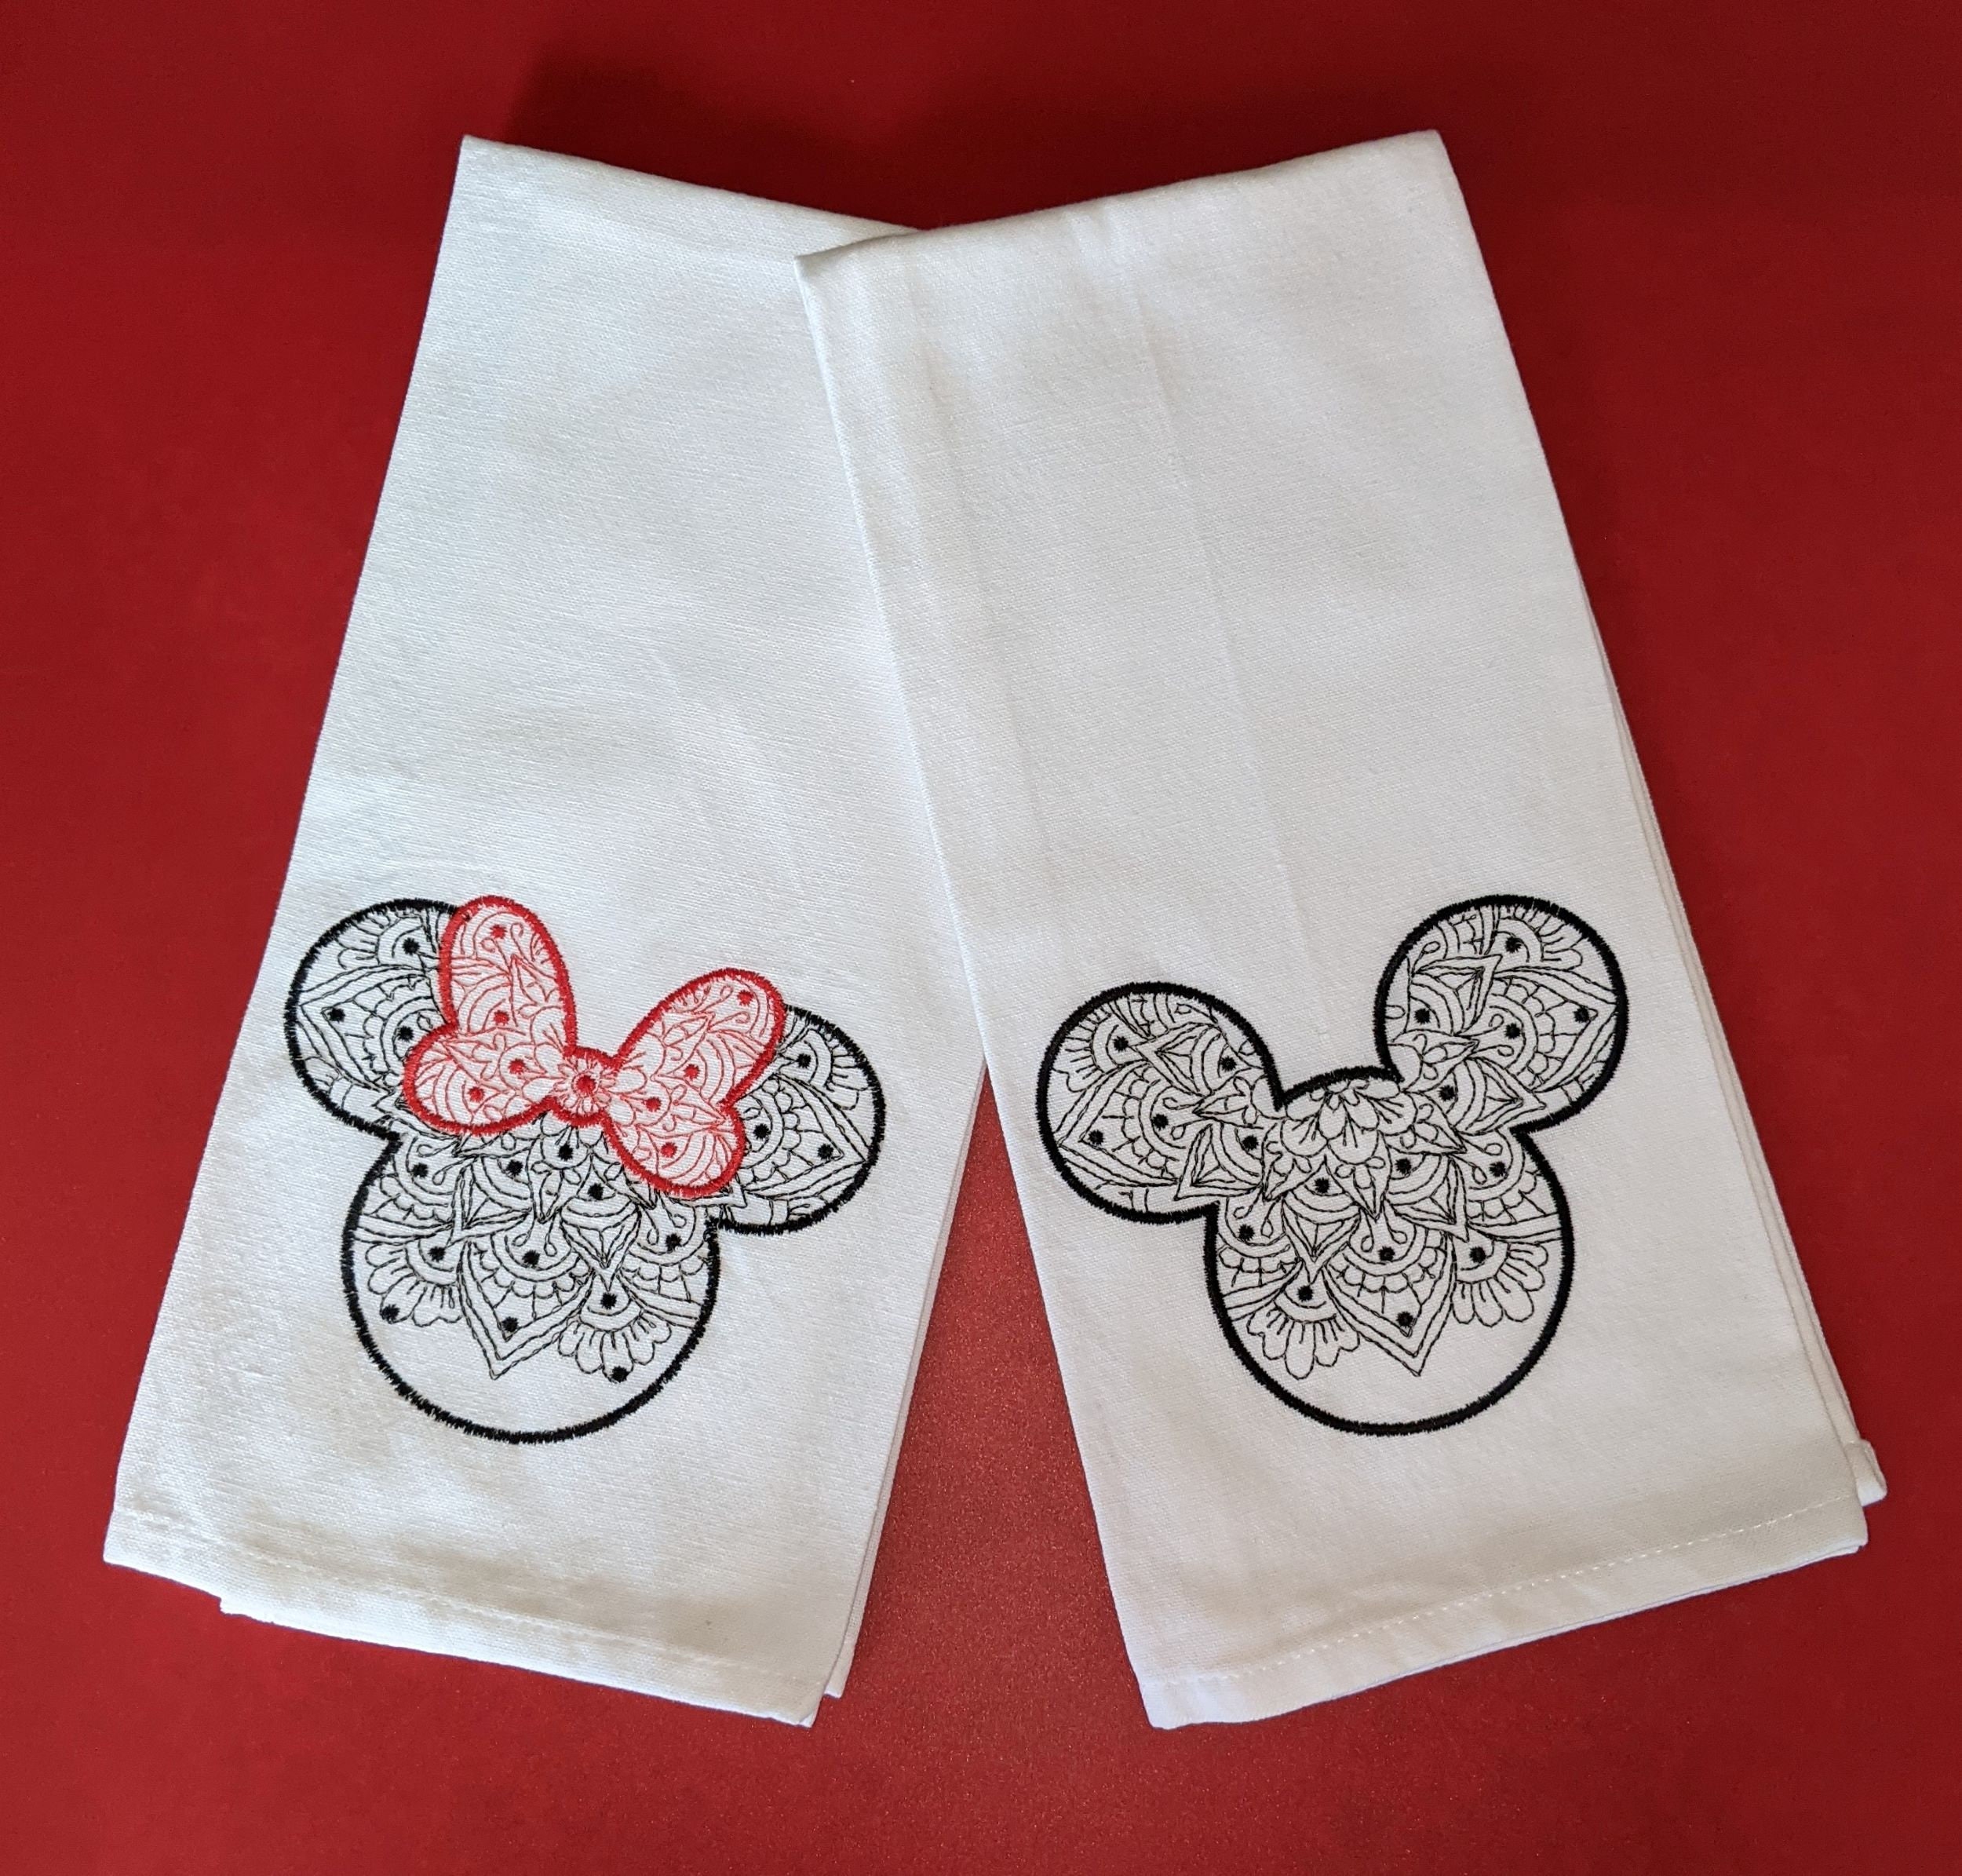 Disney's Mickey and Minnie Winter Wishes Kitchen Towel 2-pk. by St.  Nicholas Square®